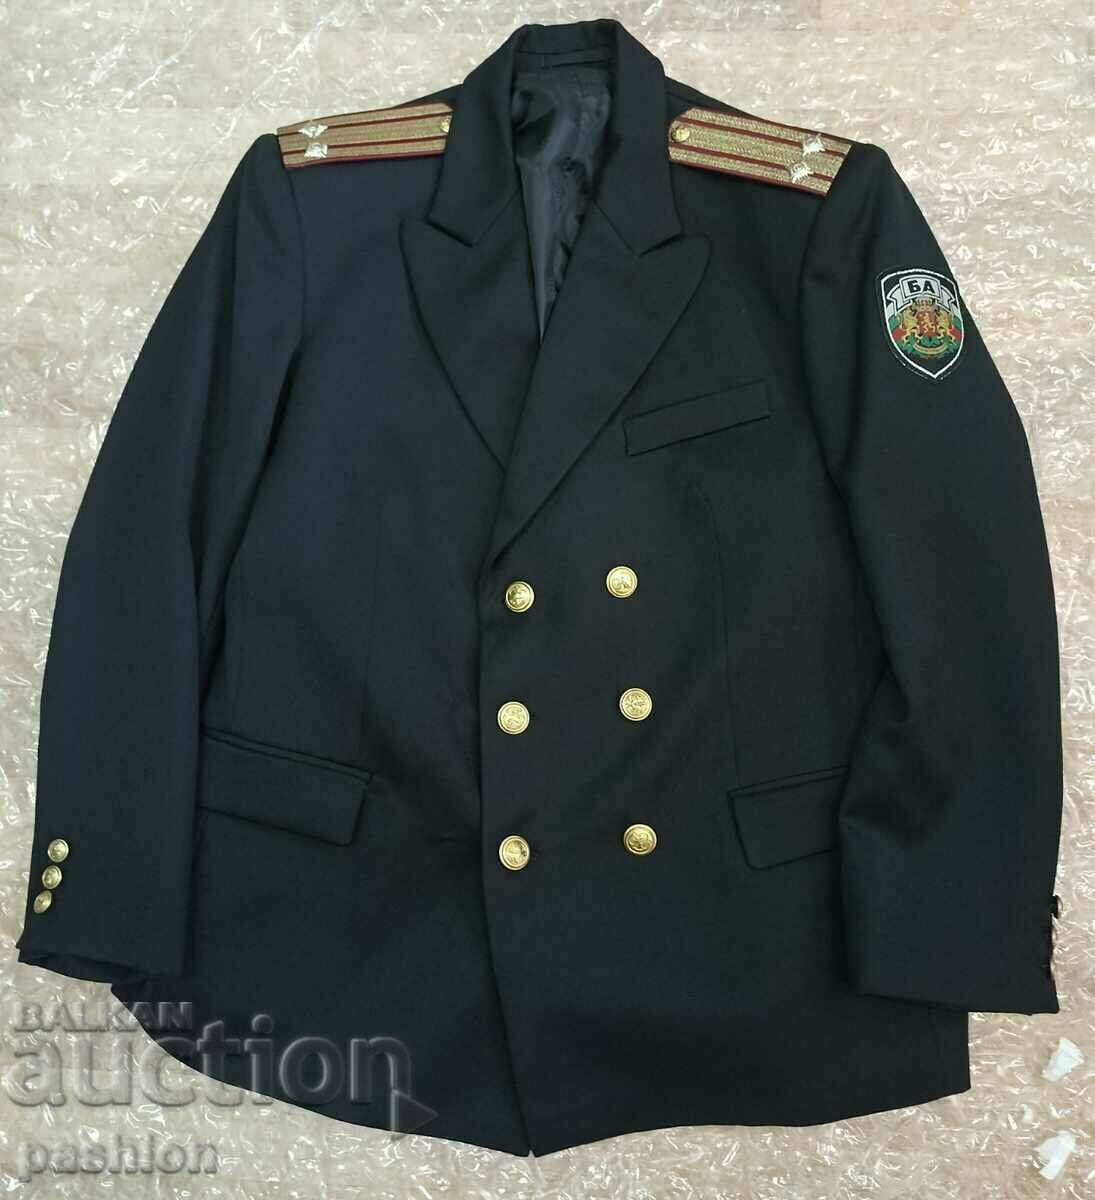 New navy jacket and gift